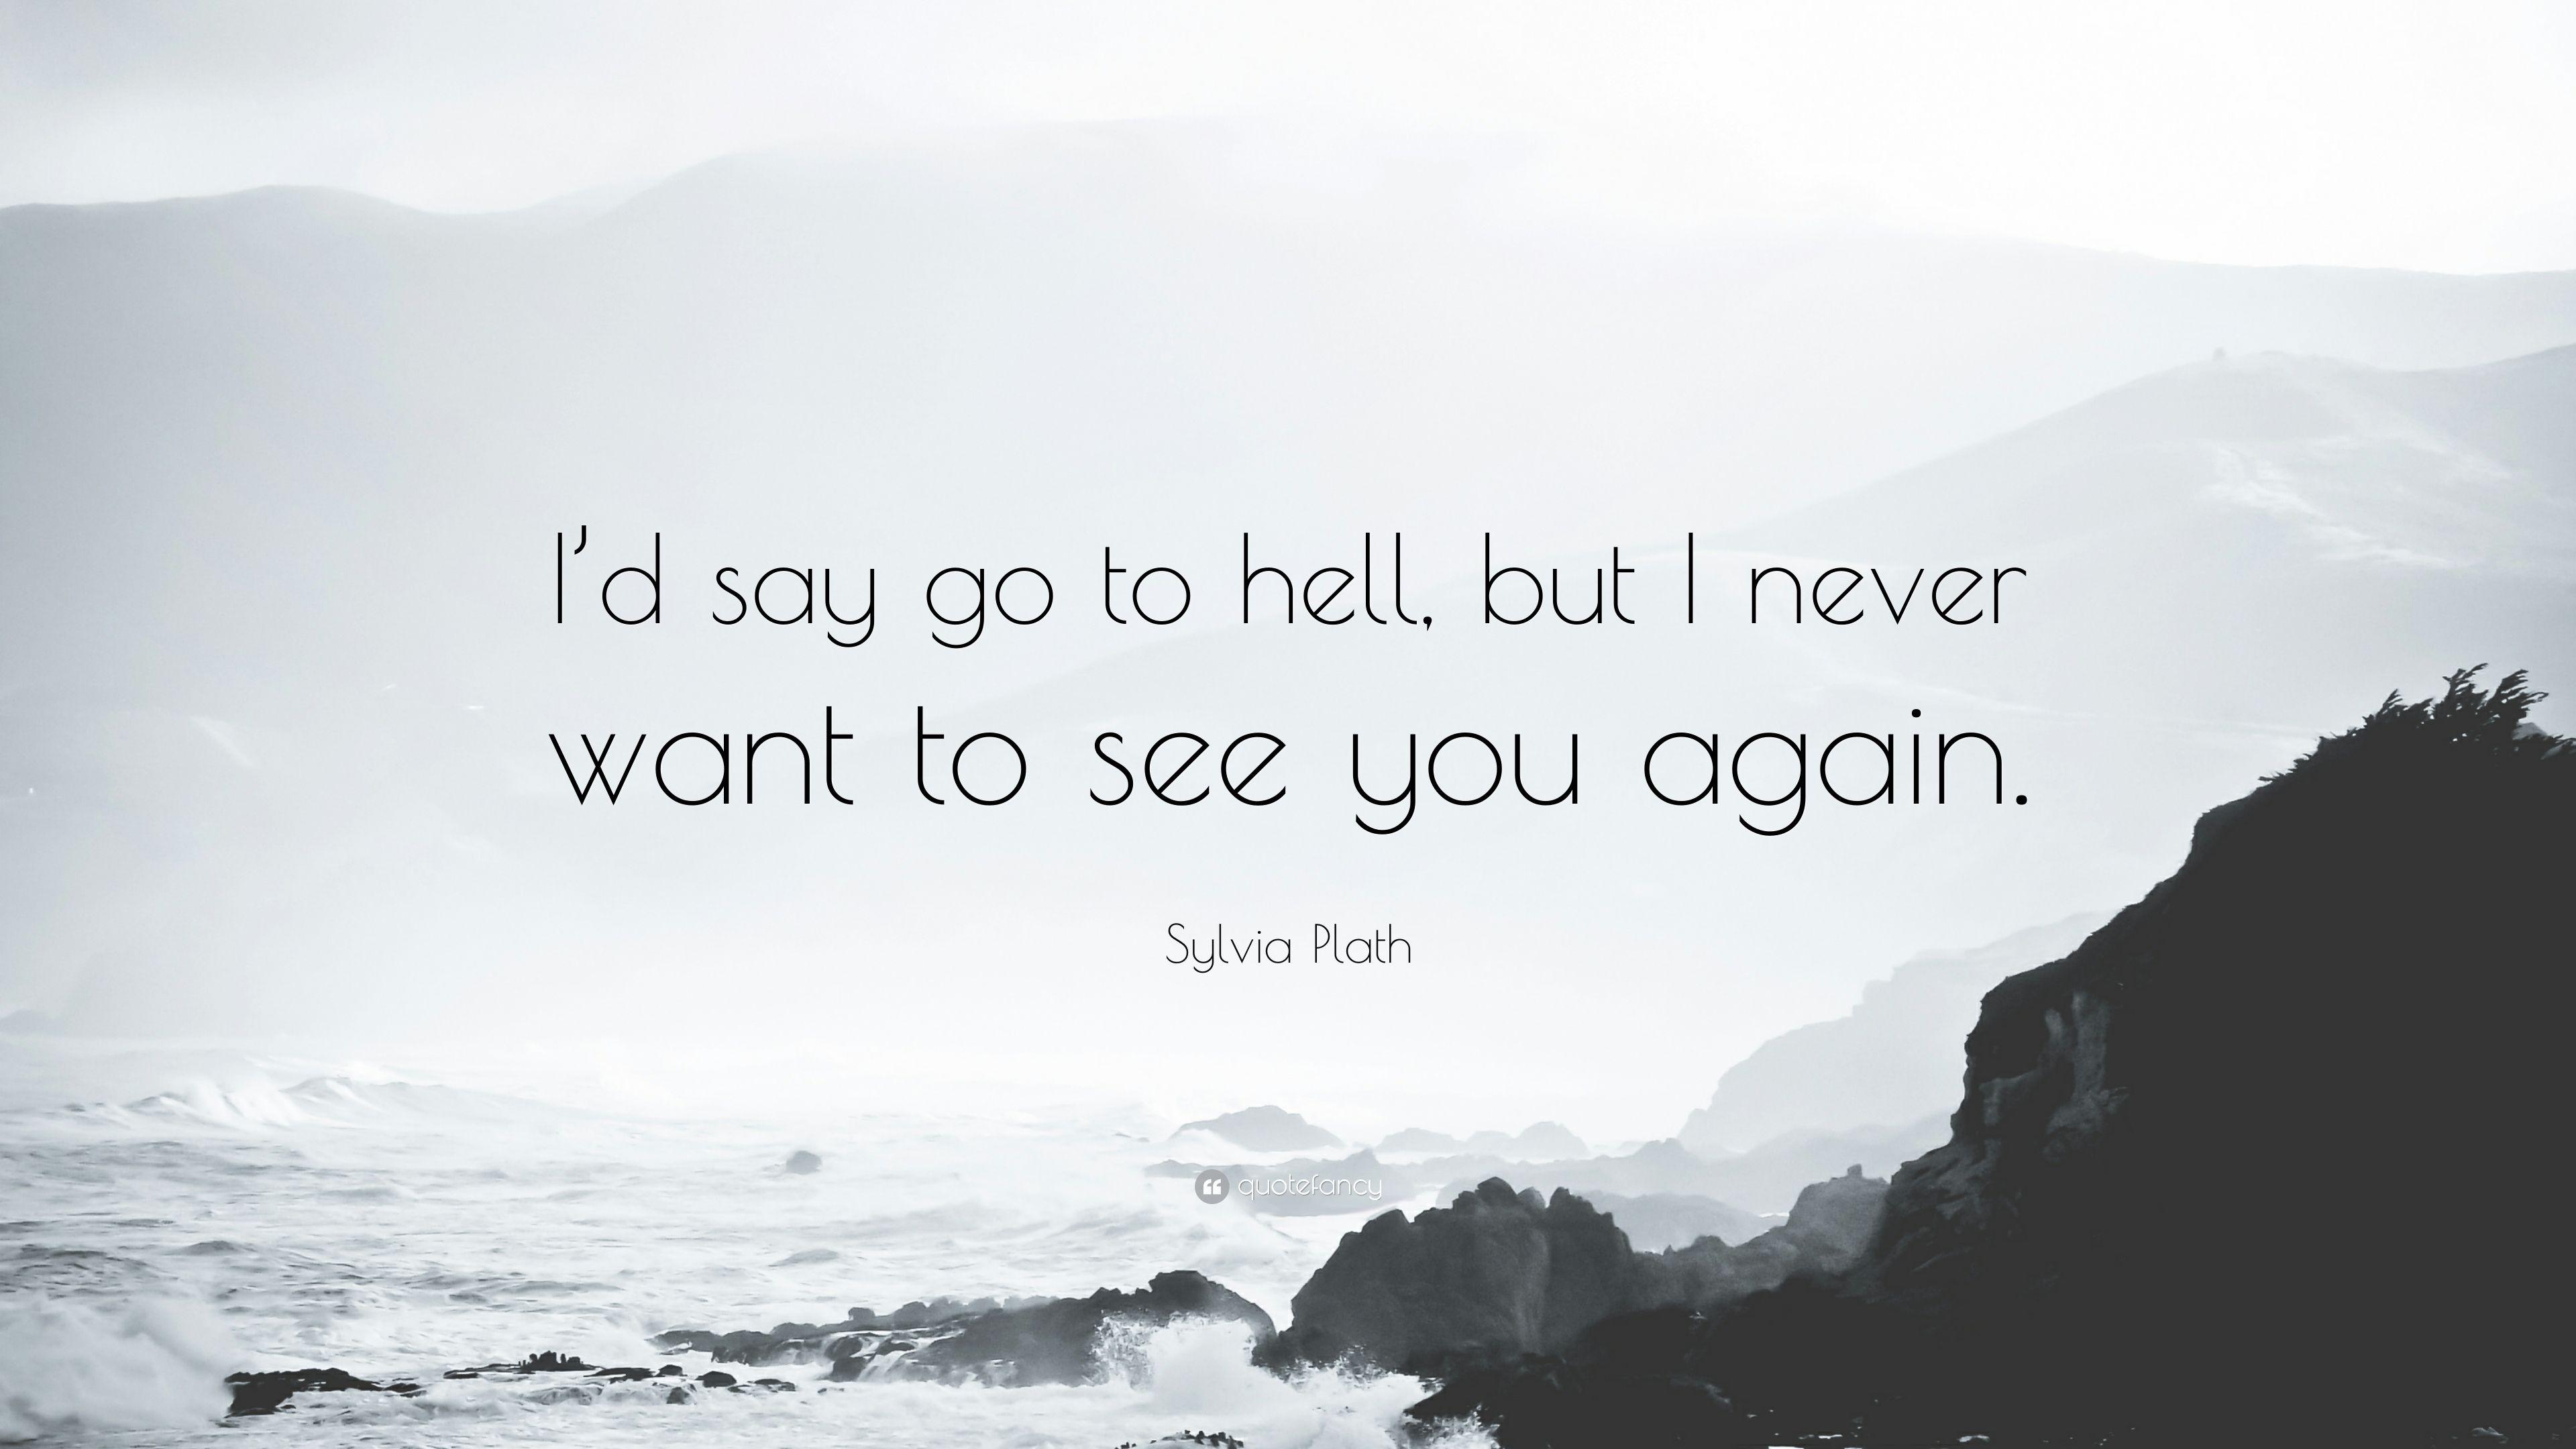 Sylvia Plath Quote: “I'd say go to hell, but I never want to see